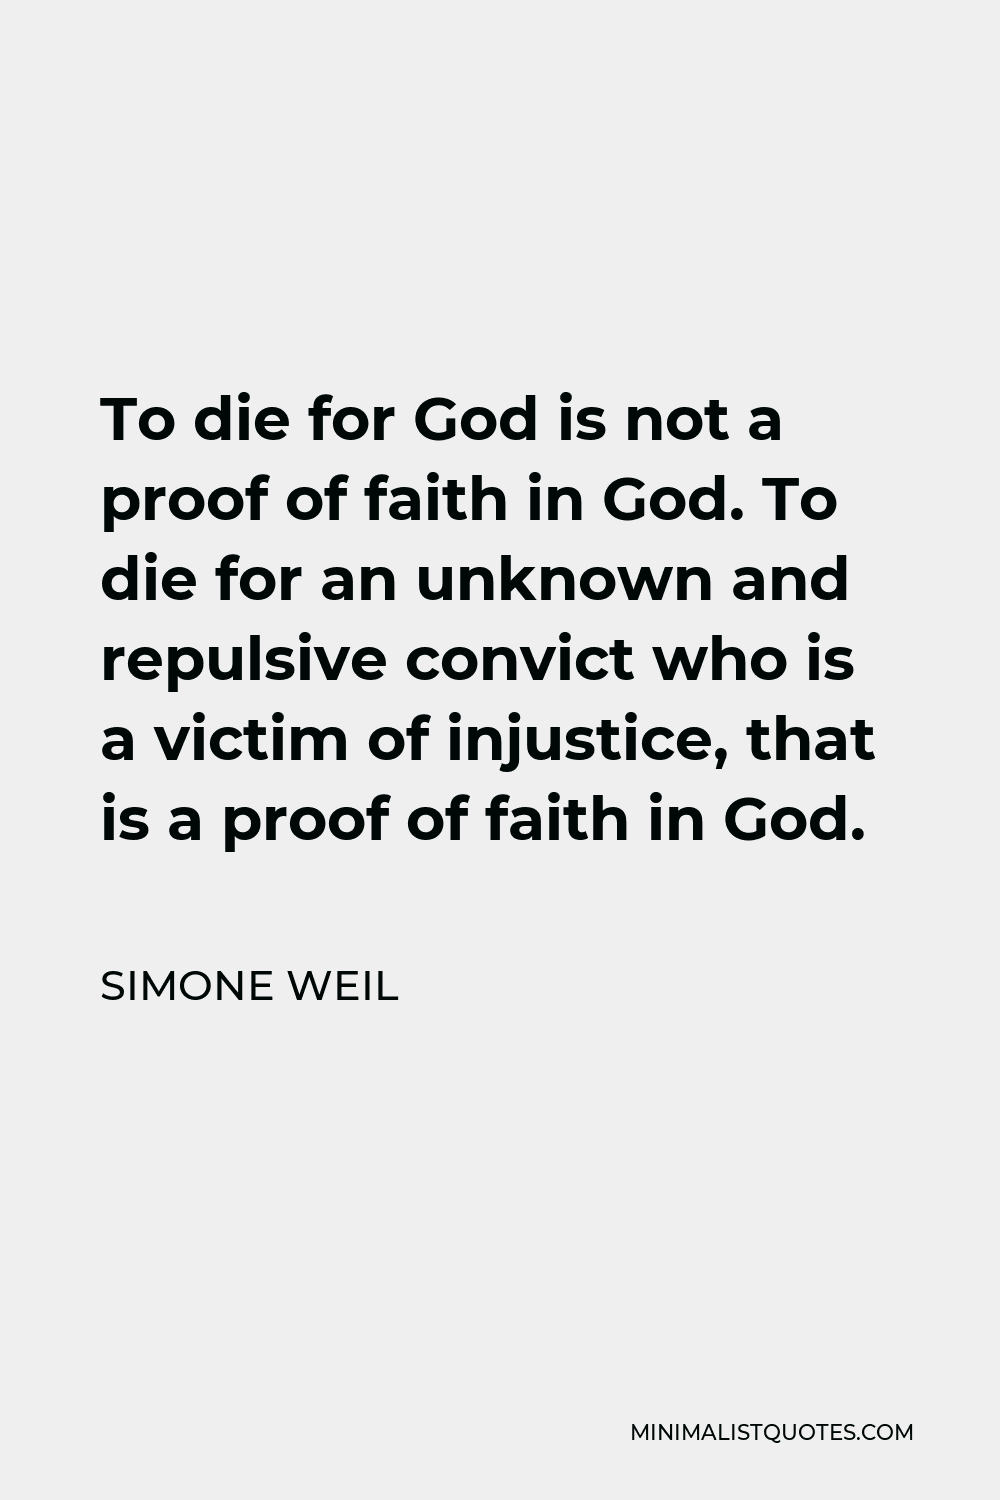 Simone Weil Quote - To die for God is not a proof of faith in God. To die for an unknown and repulsive convict who is a victim of injustice, that is a proof of faith in God.